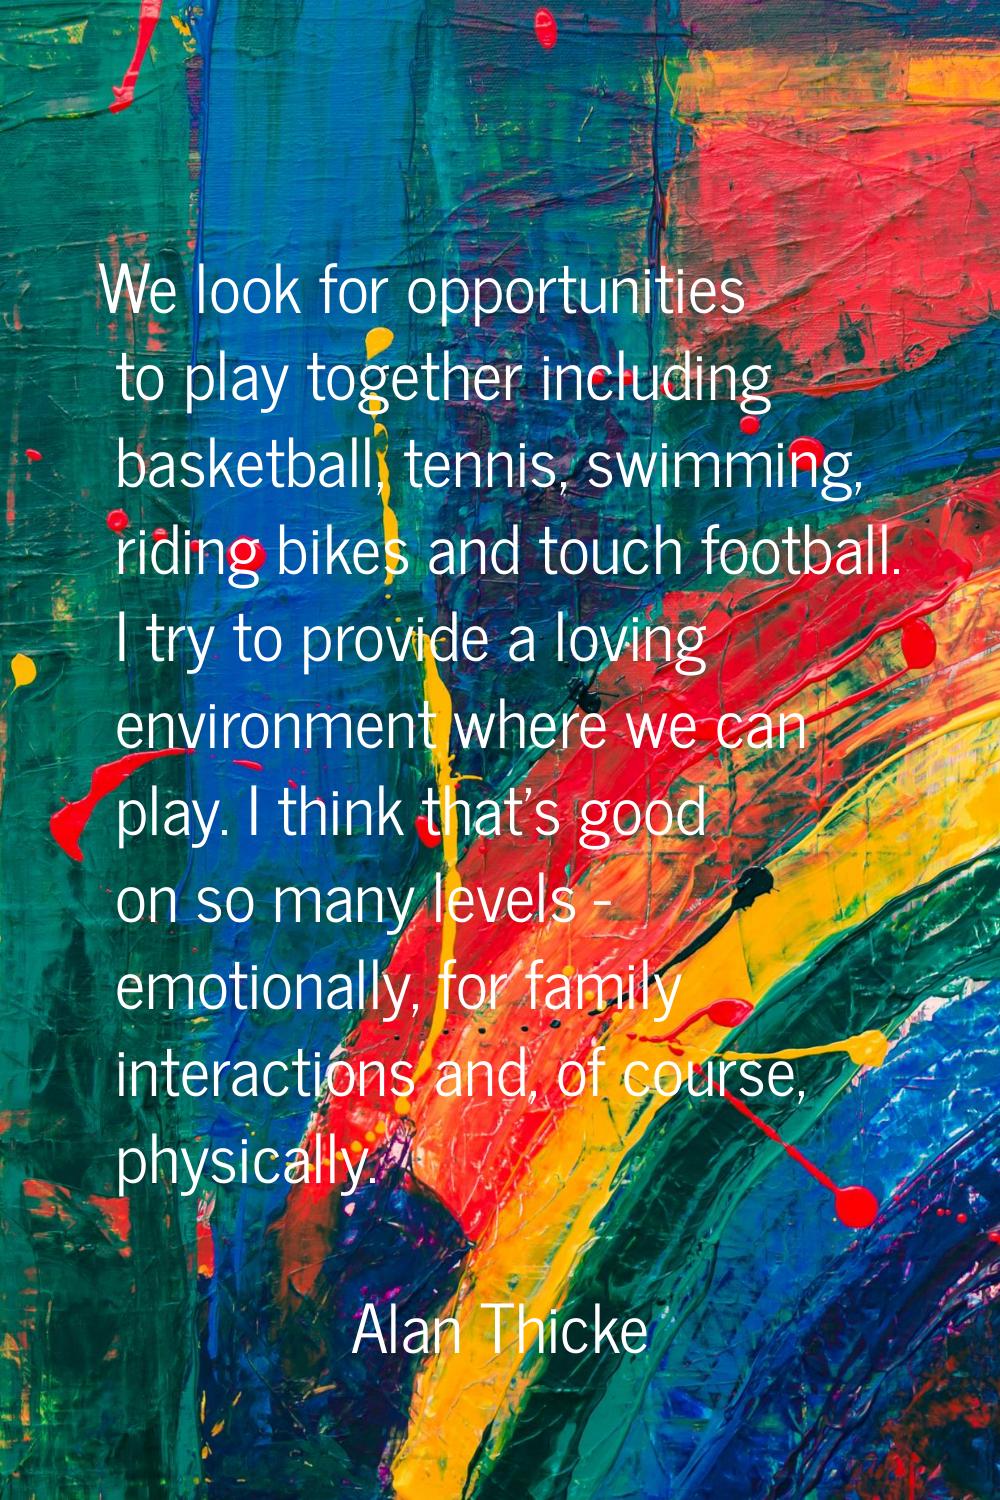 We look for opportunities to play together including basketball, tennis, swimming, riding bikes and